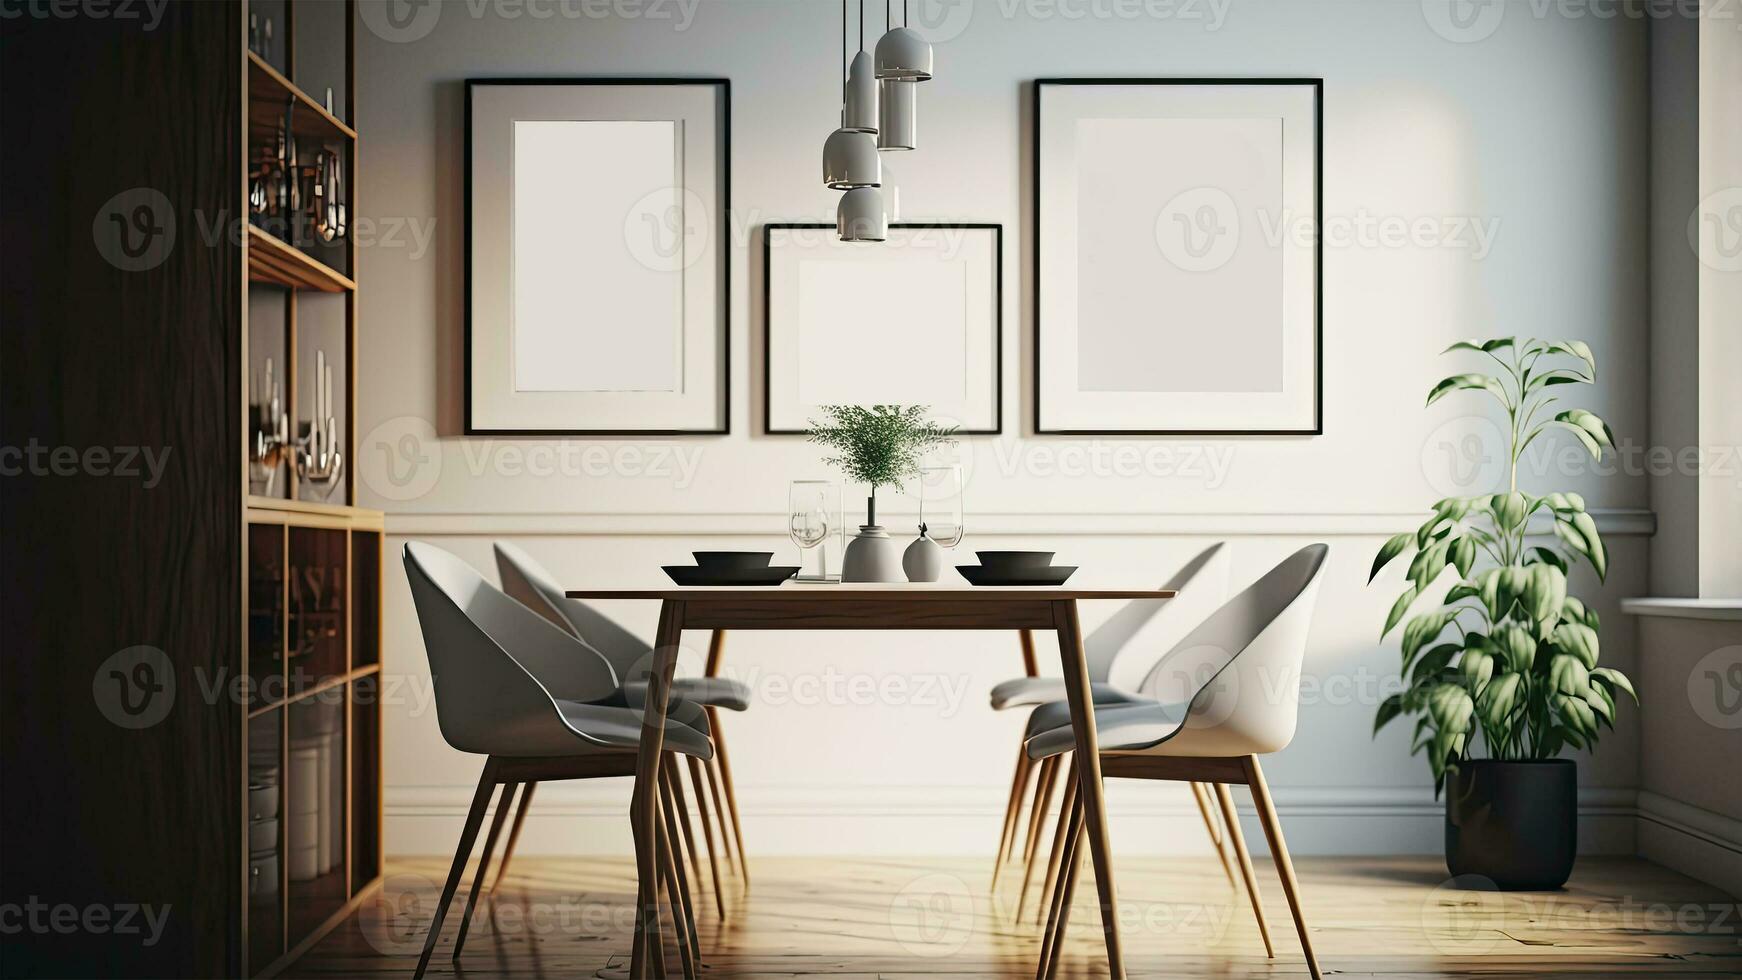 Dining Room Interior Mockup With Wooden Table, Chairs, Plant Pots And Image Placeholder Frames Hanging On Wall. 3D Rendering. photo